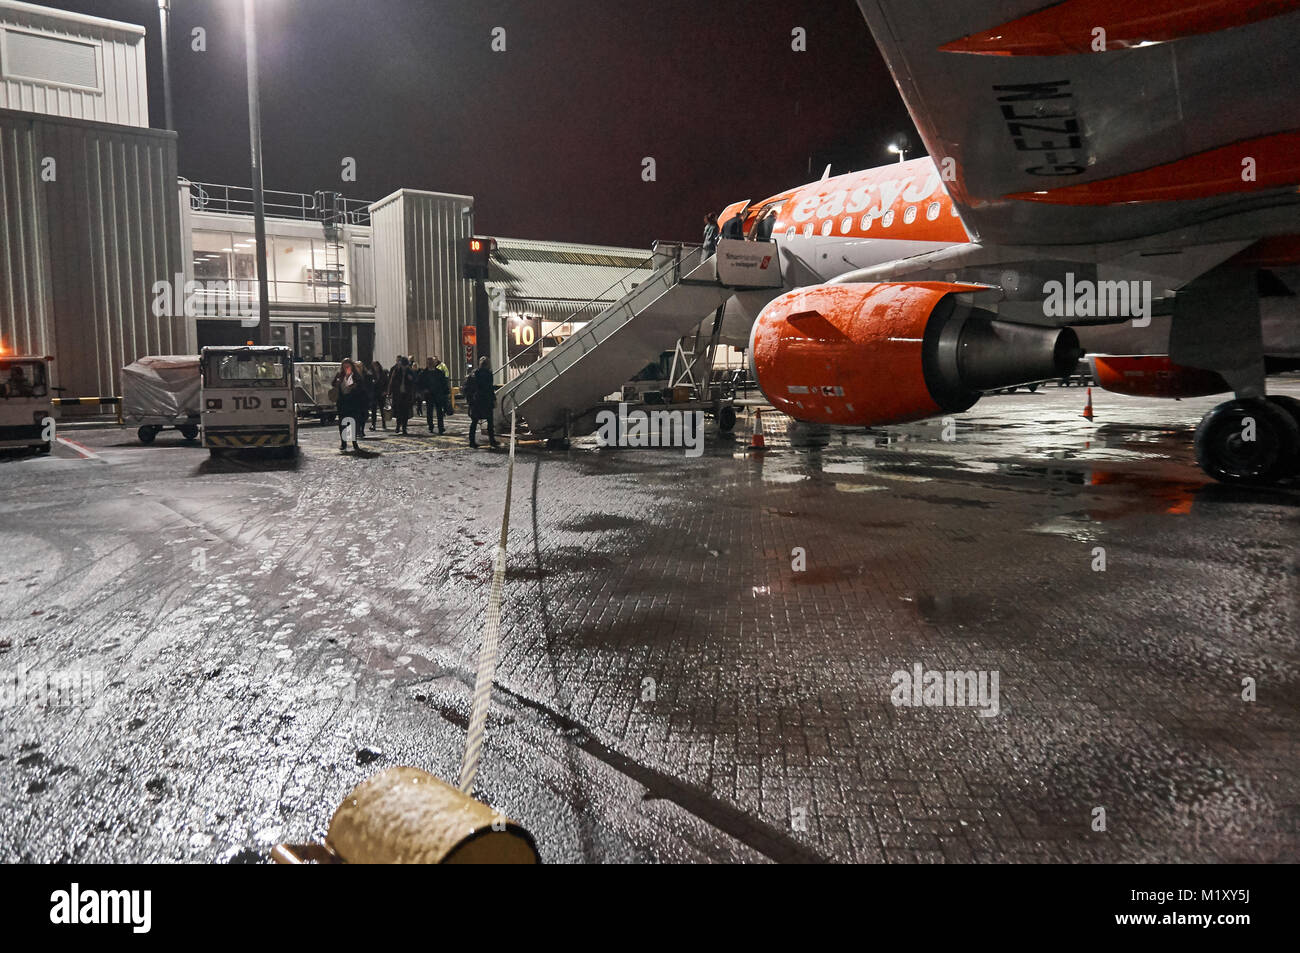 Night scene of passengers boarding an Easyjet aircraft at Glasgow airport, departing to London. Stock Photo